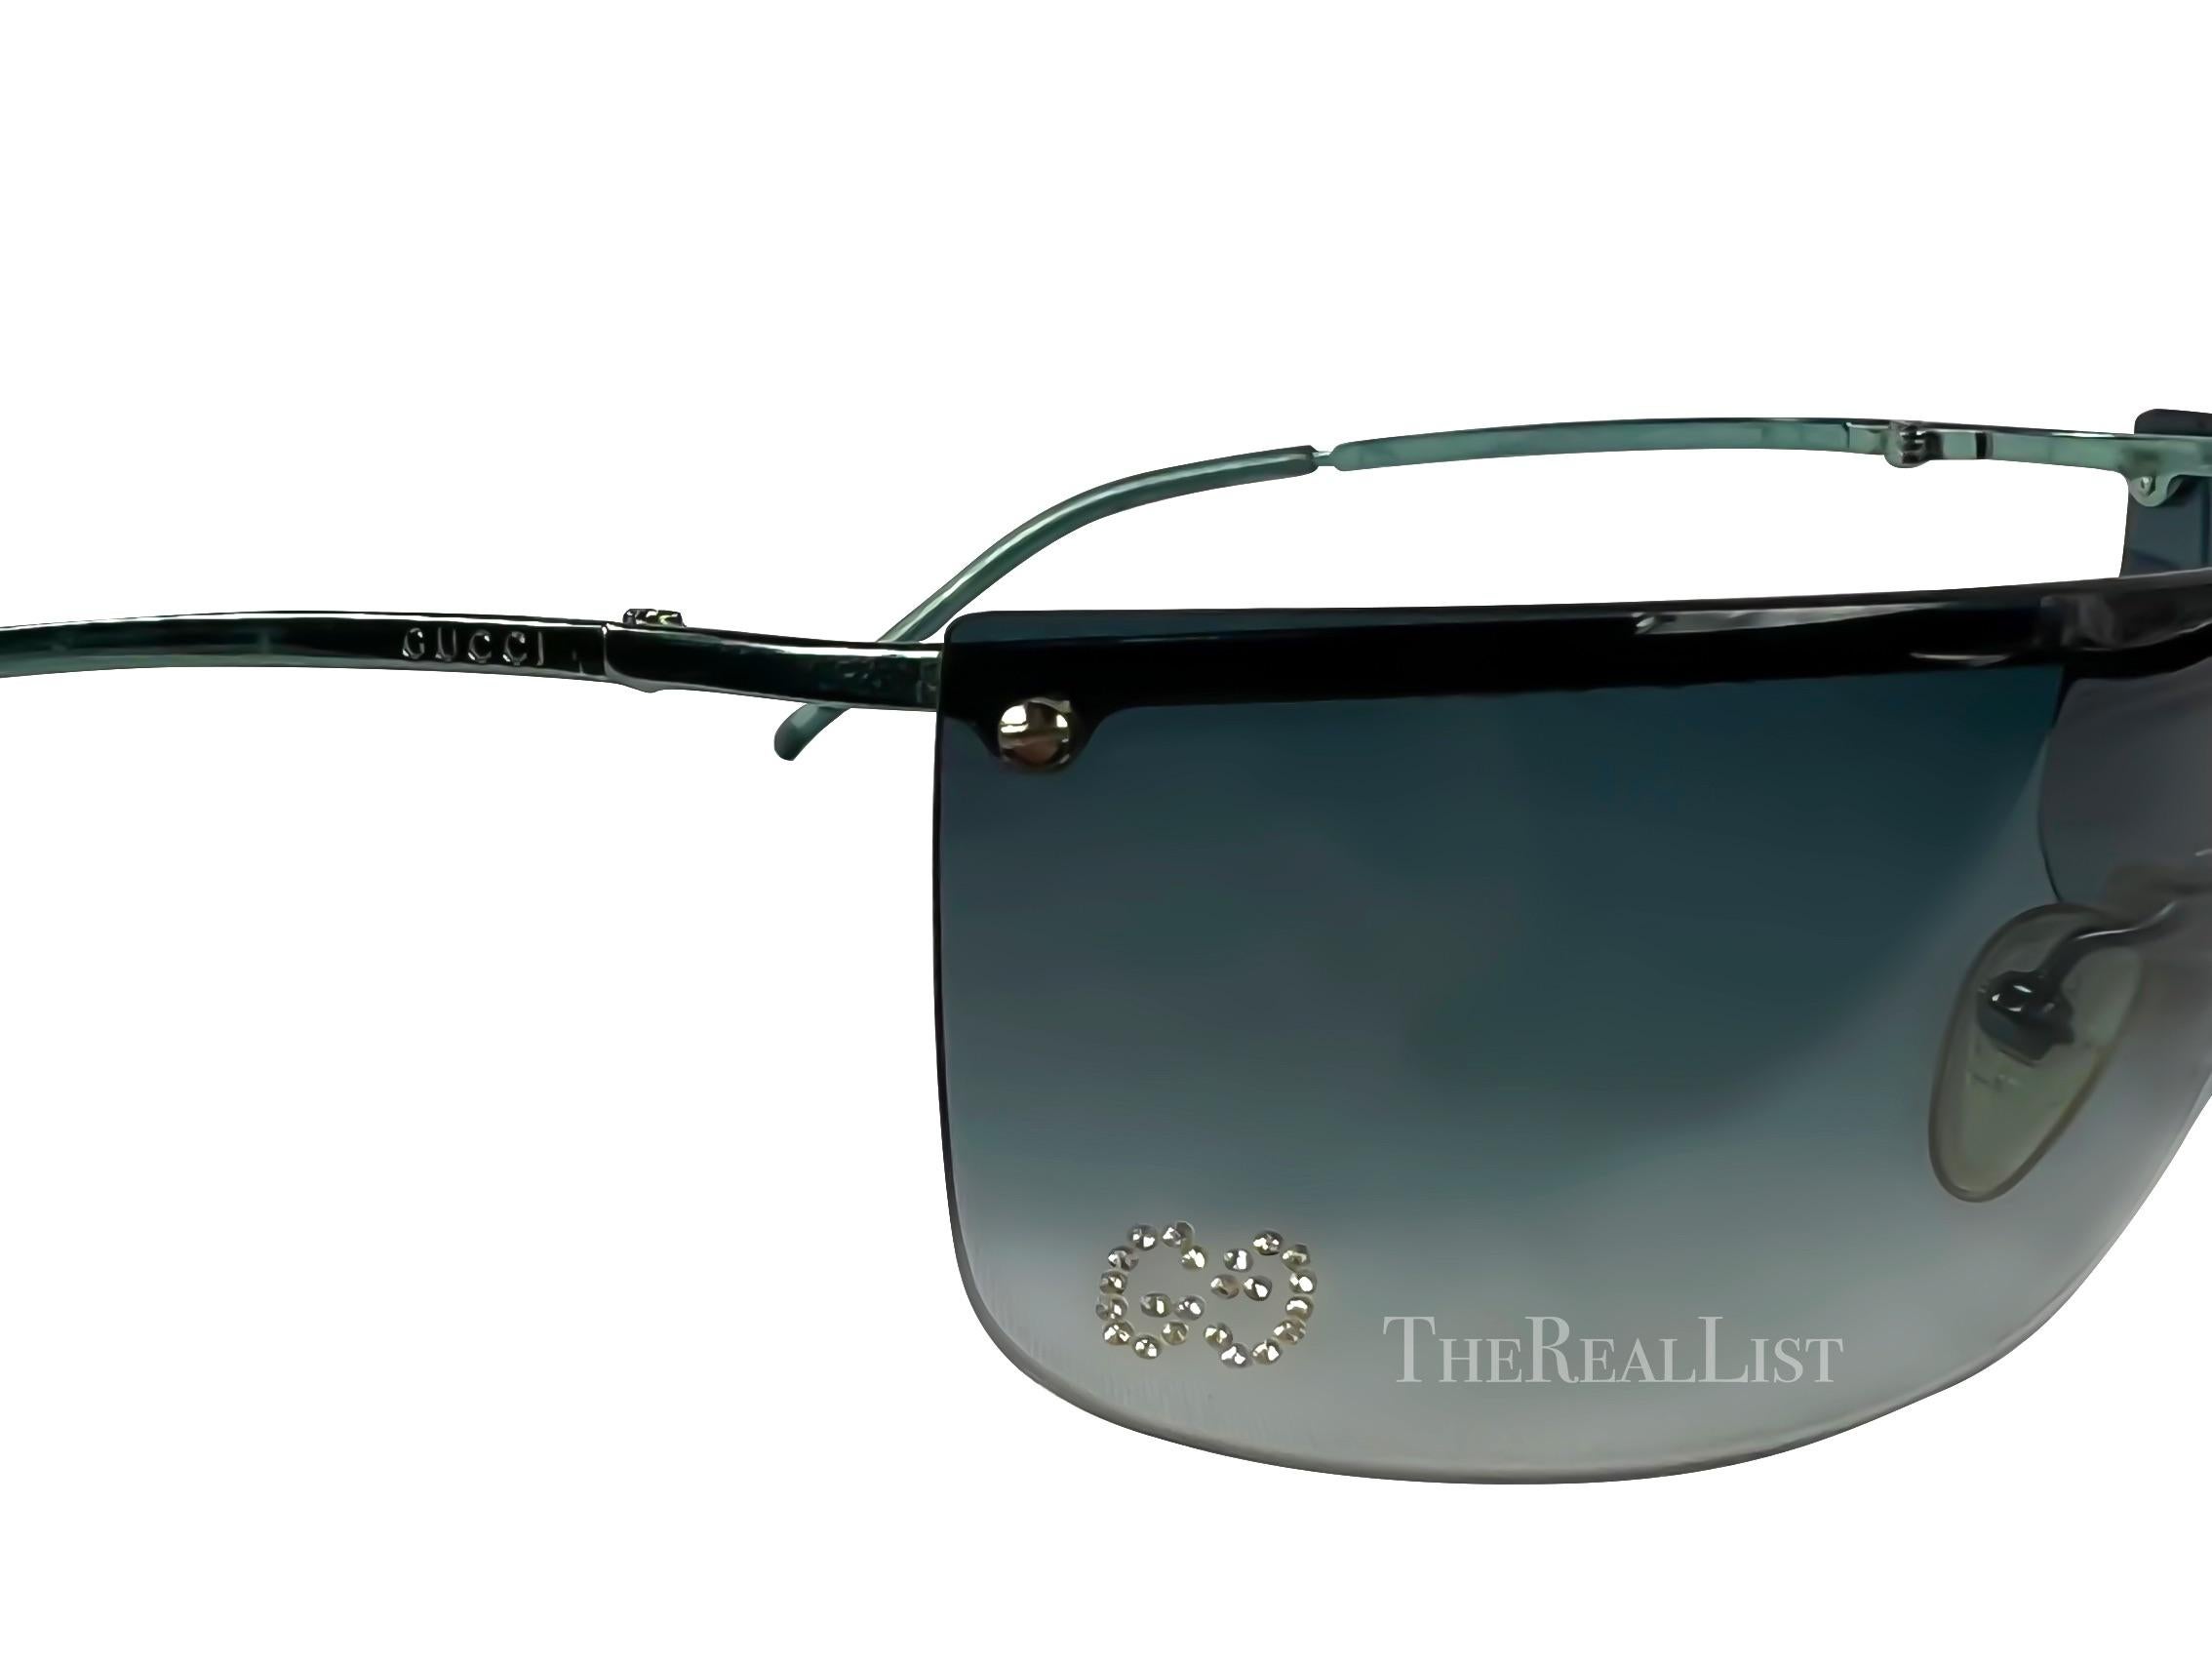 Presenting a fabulous pair of golf-tone rimless Gucci sunglasses, designed by Tom Ford. With their timeless appeal, these ultra-chic sunglasses are a must-have addition to any collection. The rimless design exudes contemporary elegance, while the